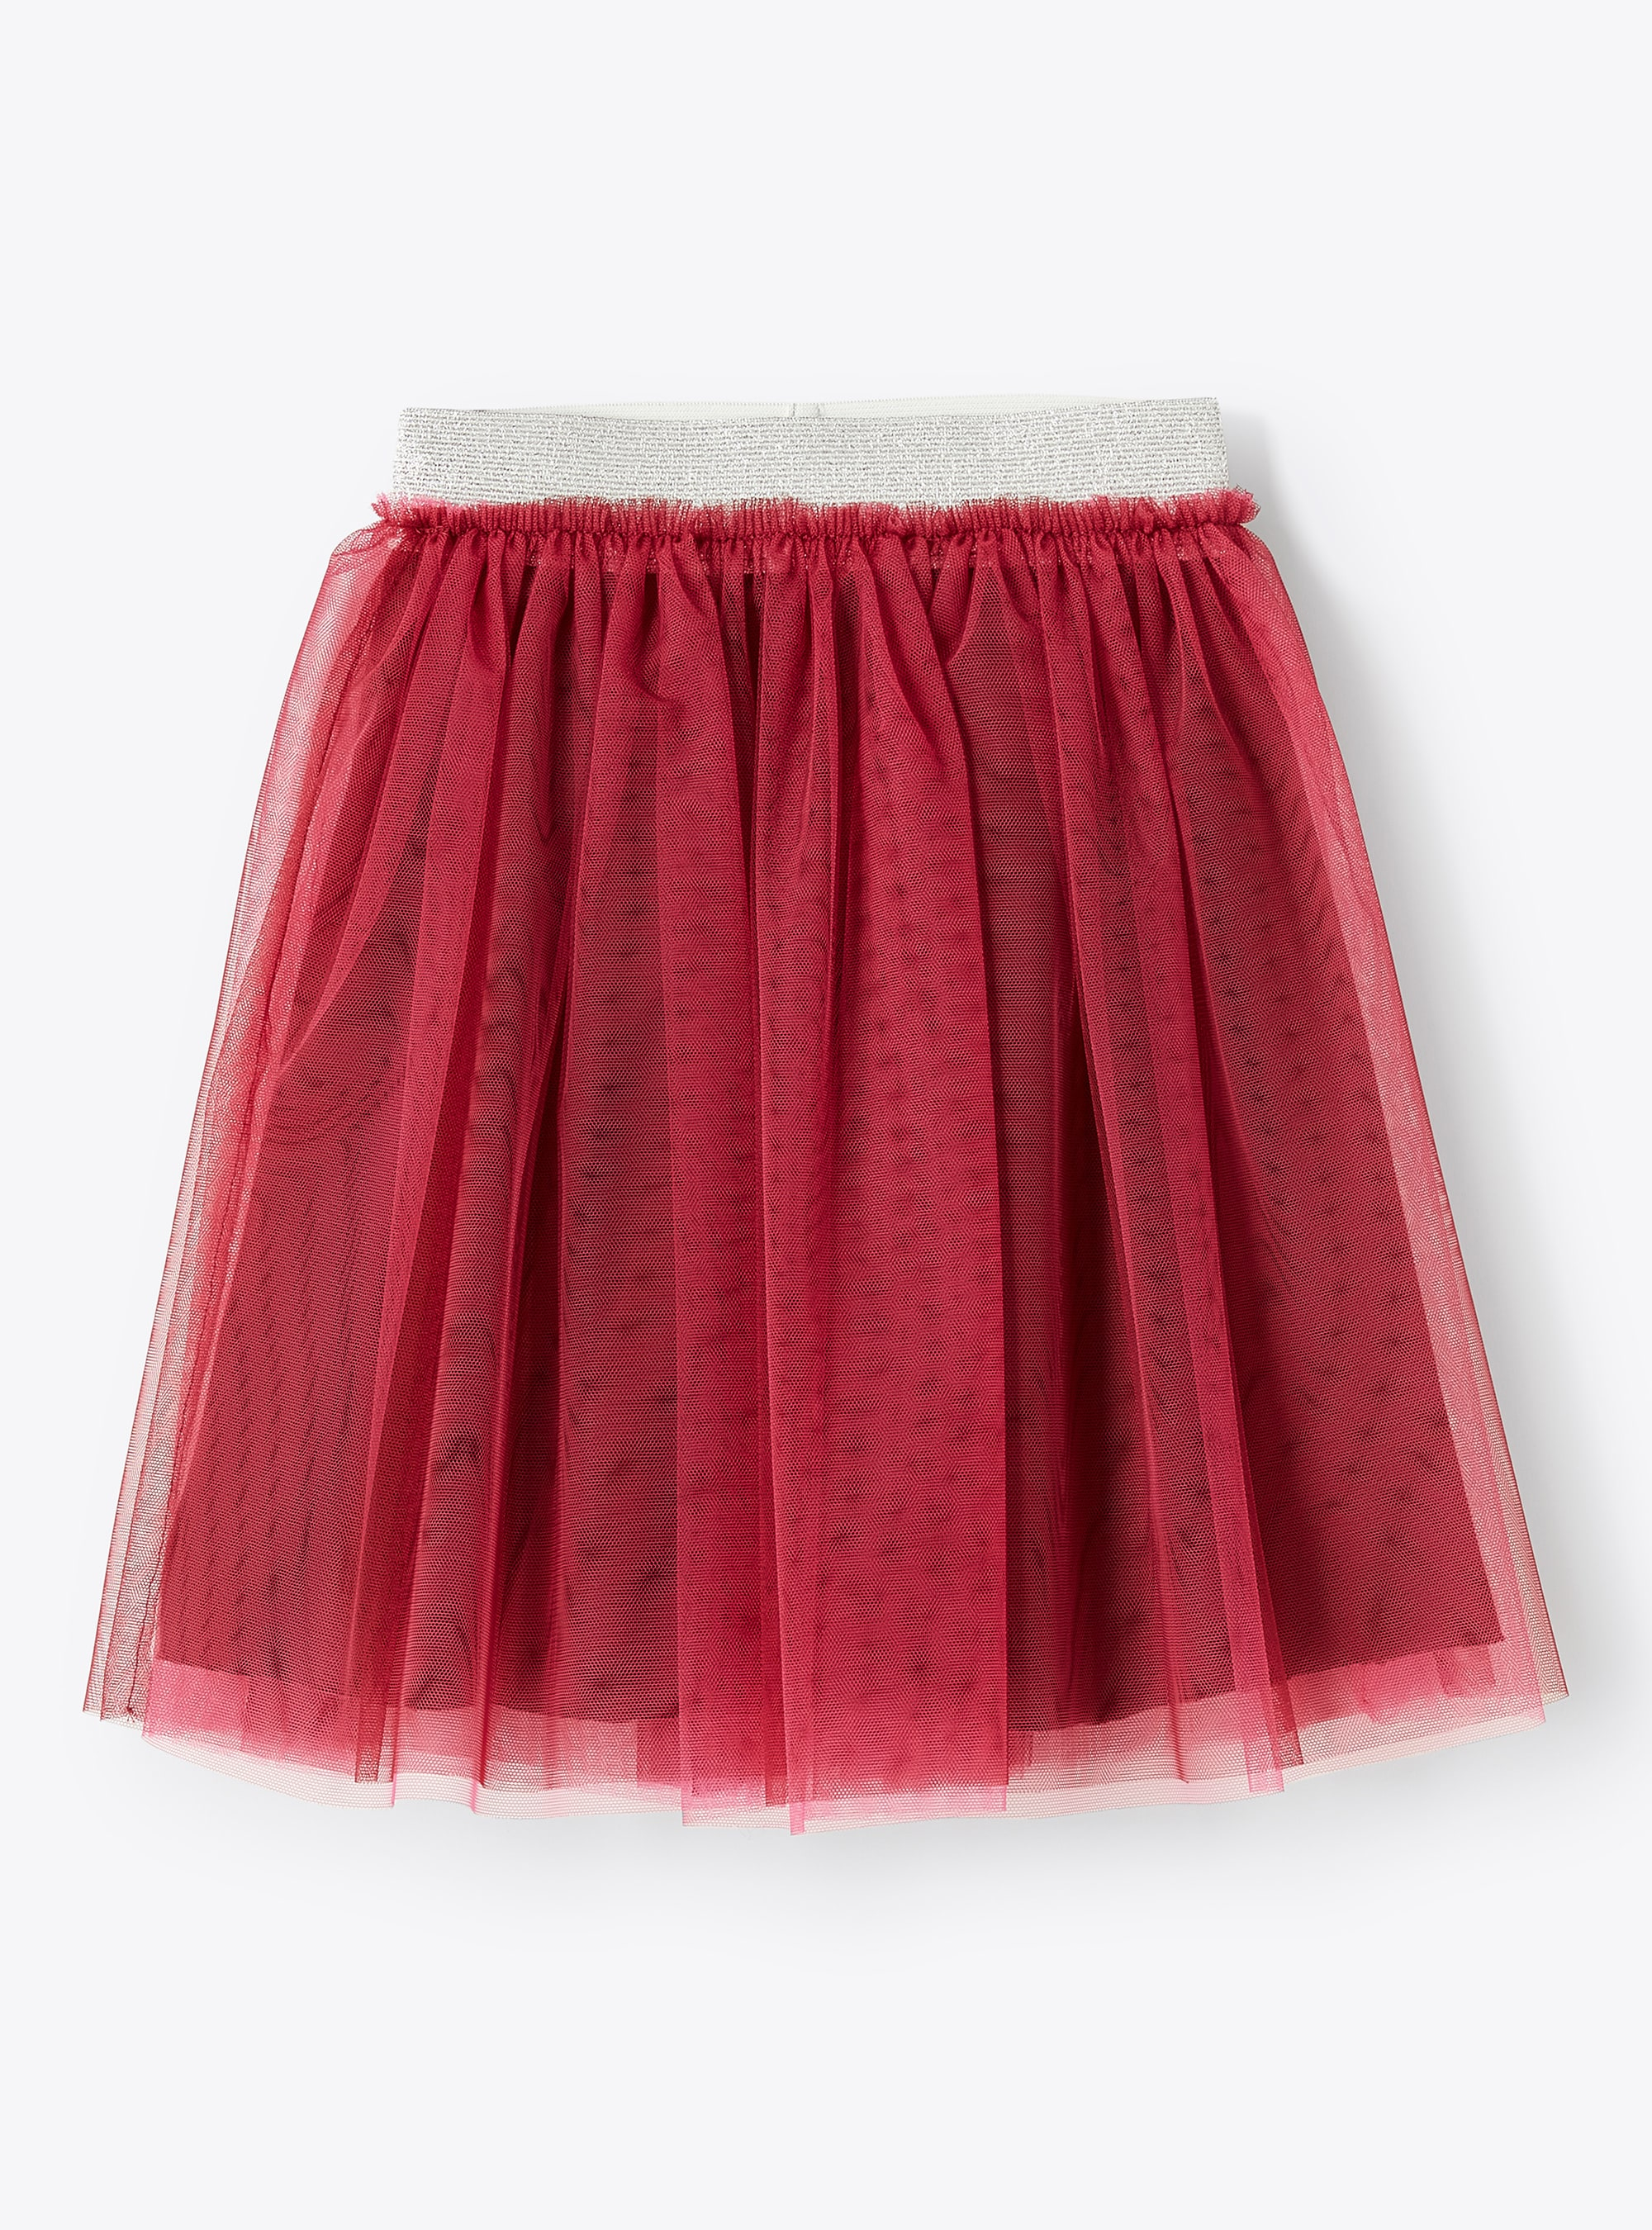 Red tulle skirt - Skirts - Il Gufo